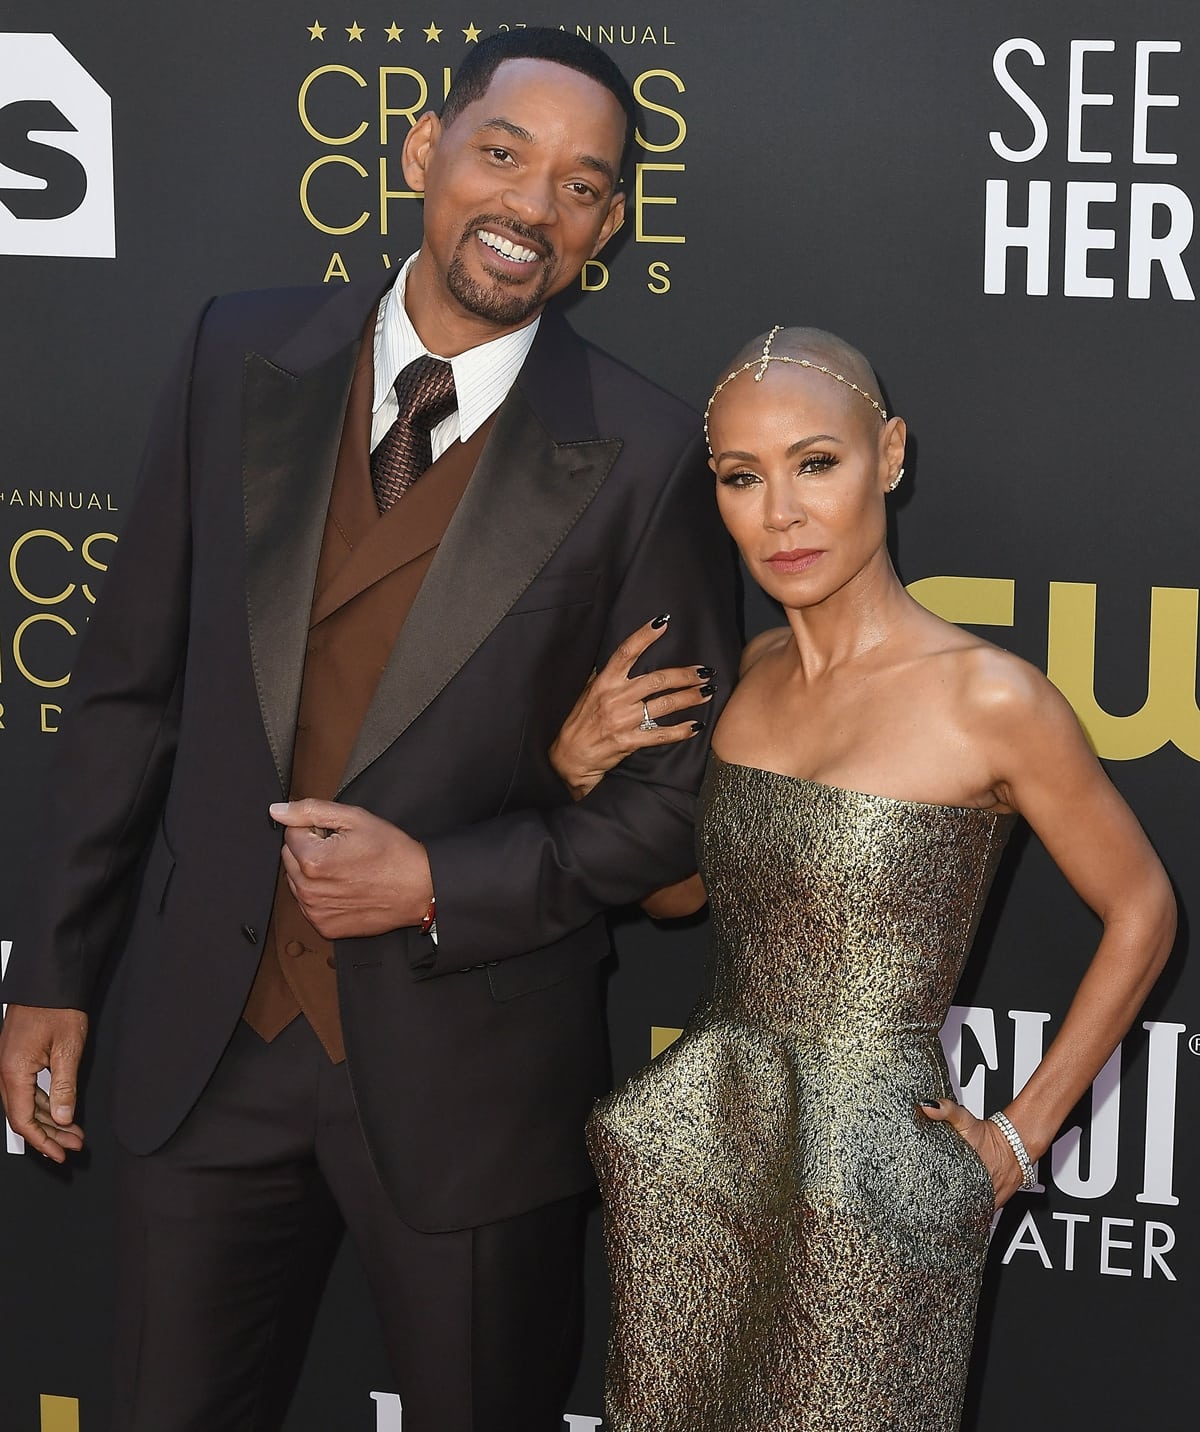 Will Smith's height is approximately 6 feet 1.5 inches (186.7 cm), while Jada Pinkett Smith's height is about 4 feet 11.5 inches (151.1 cm)